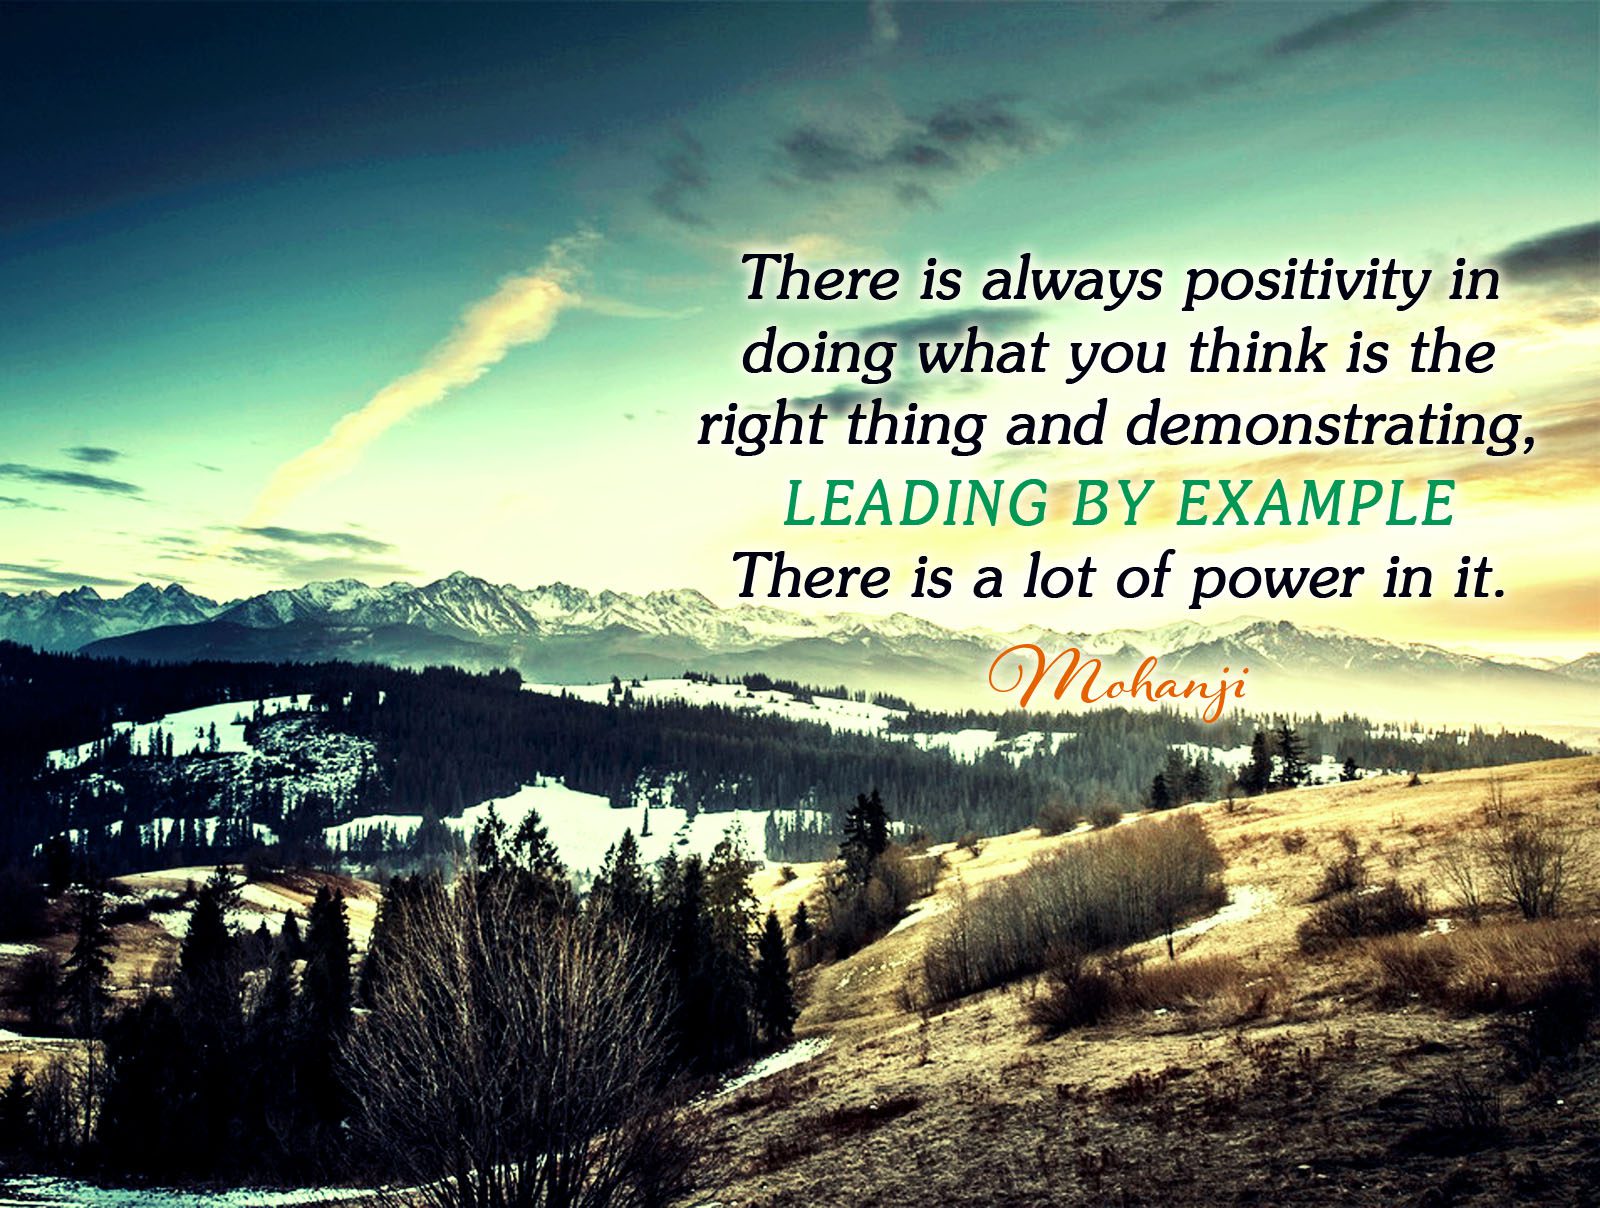 Mohanji quote - There is always positivity in